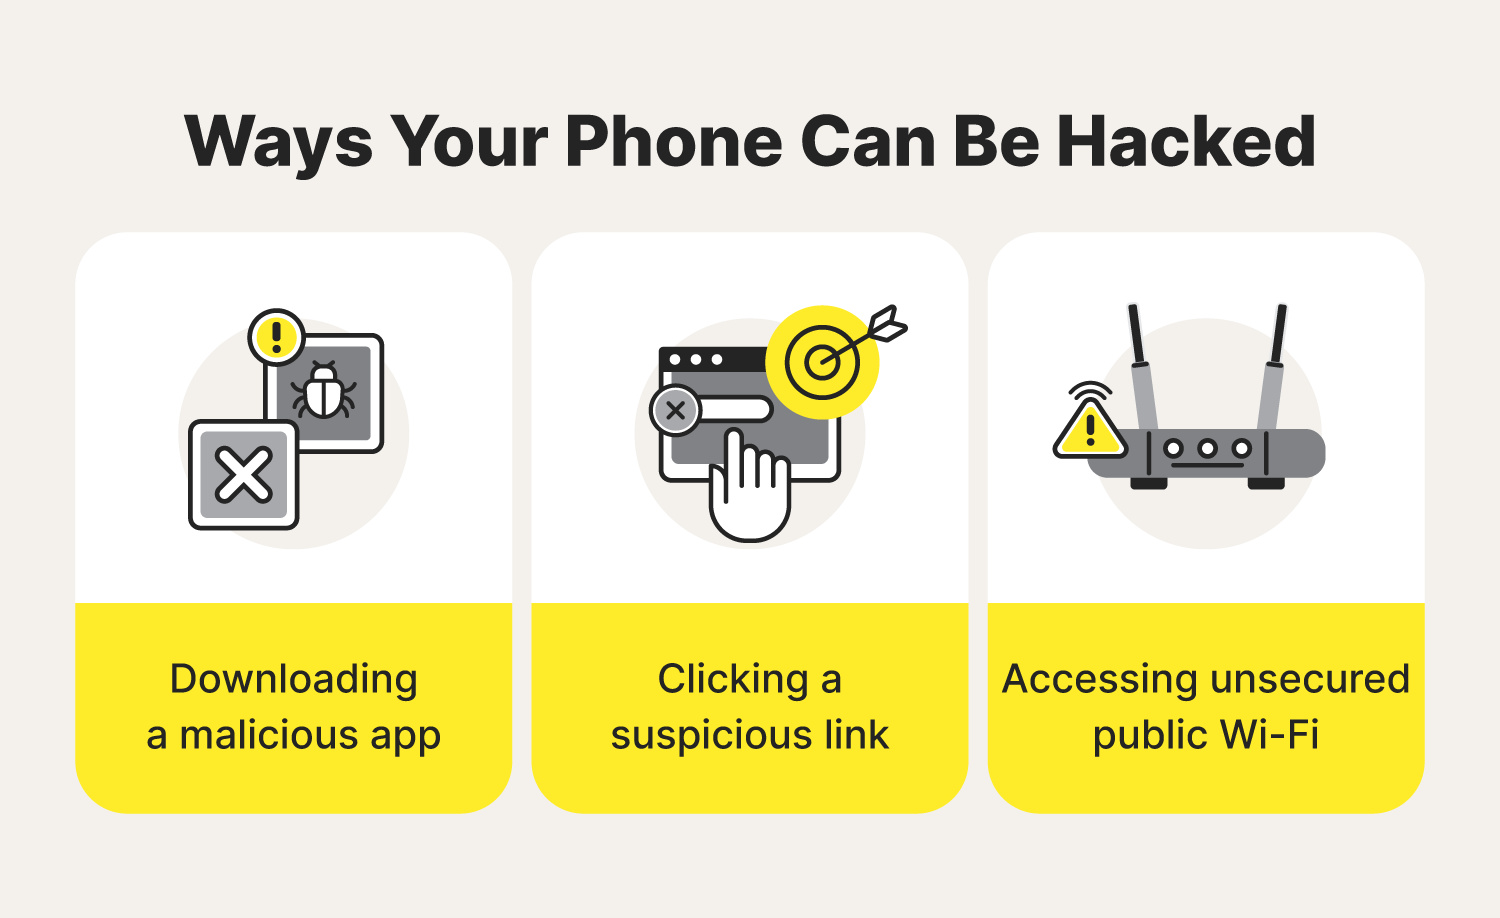 Three illustrations highlight hacking methods to be aware of when learning how to know if your phone is hacked.